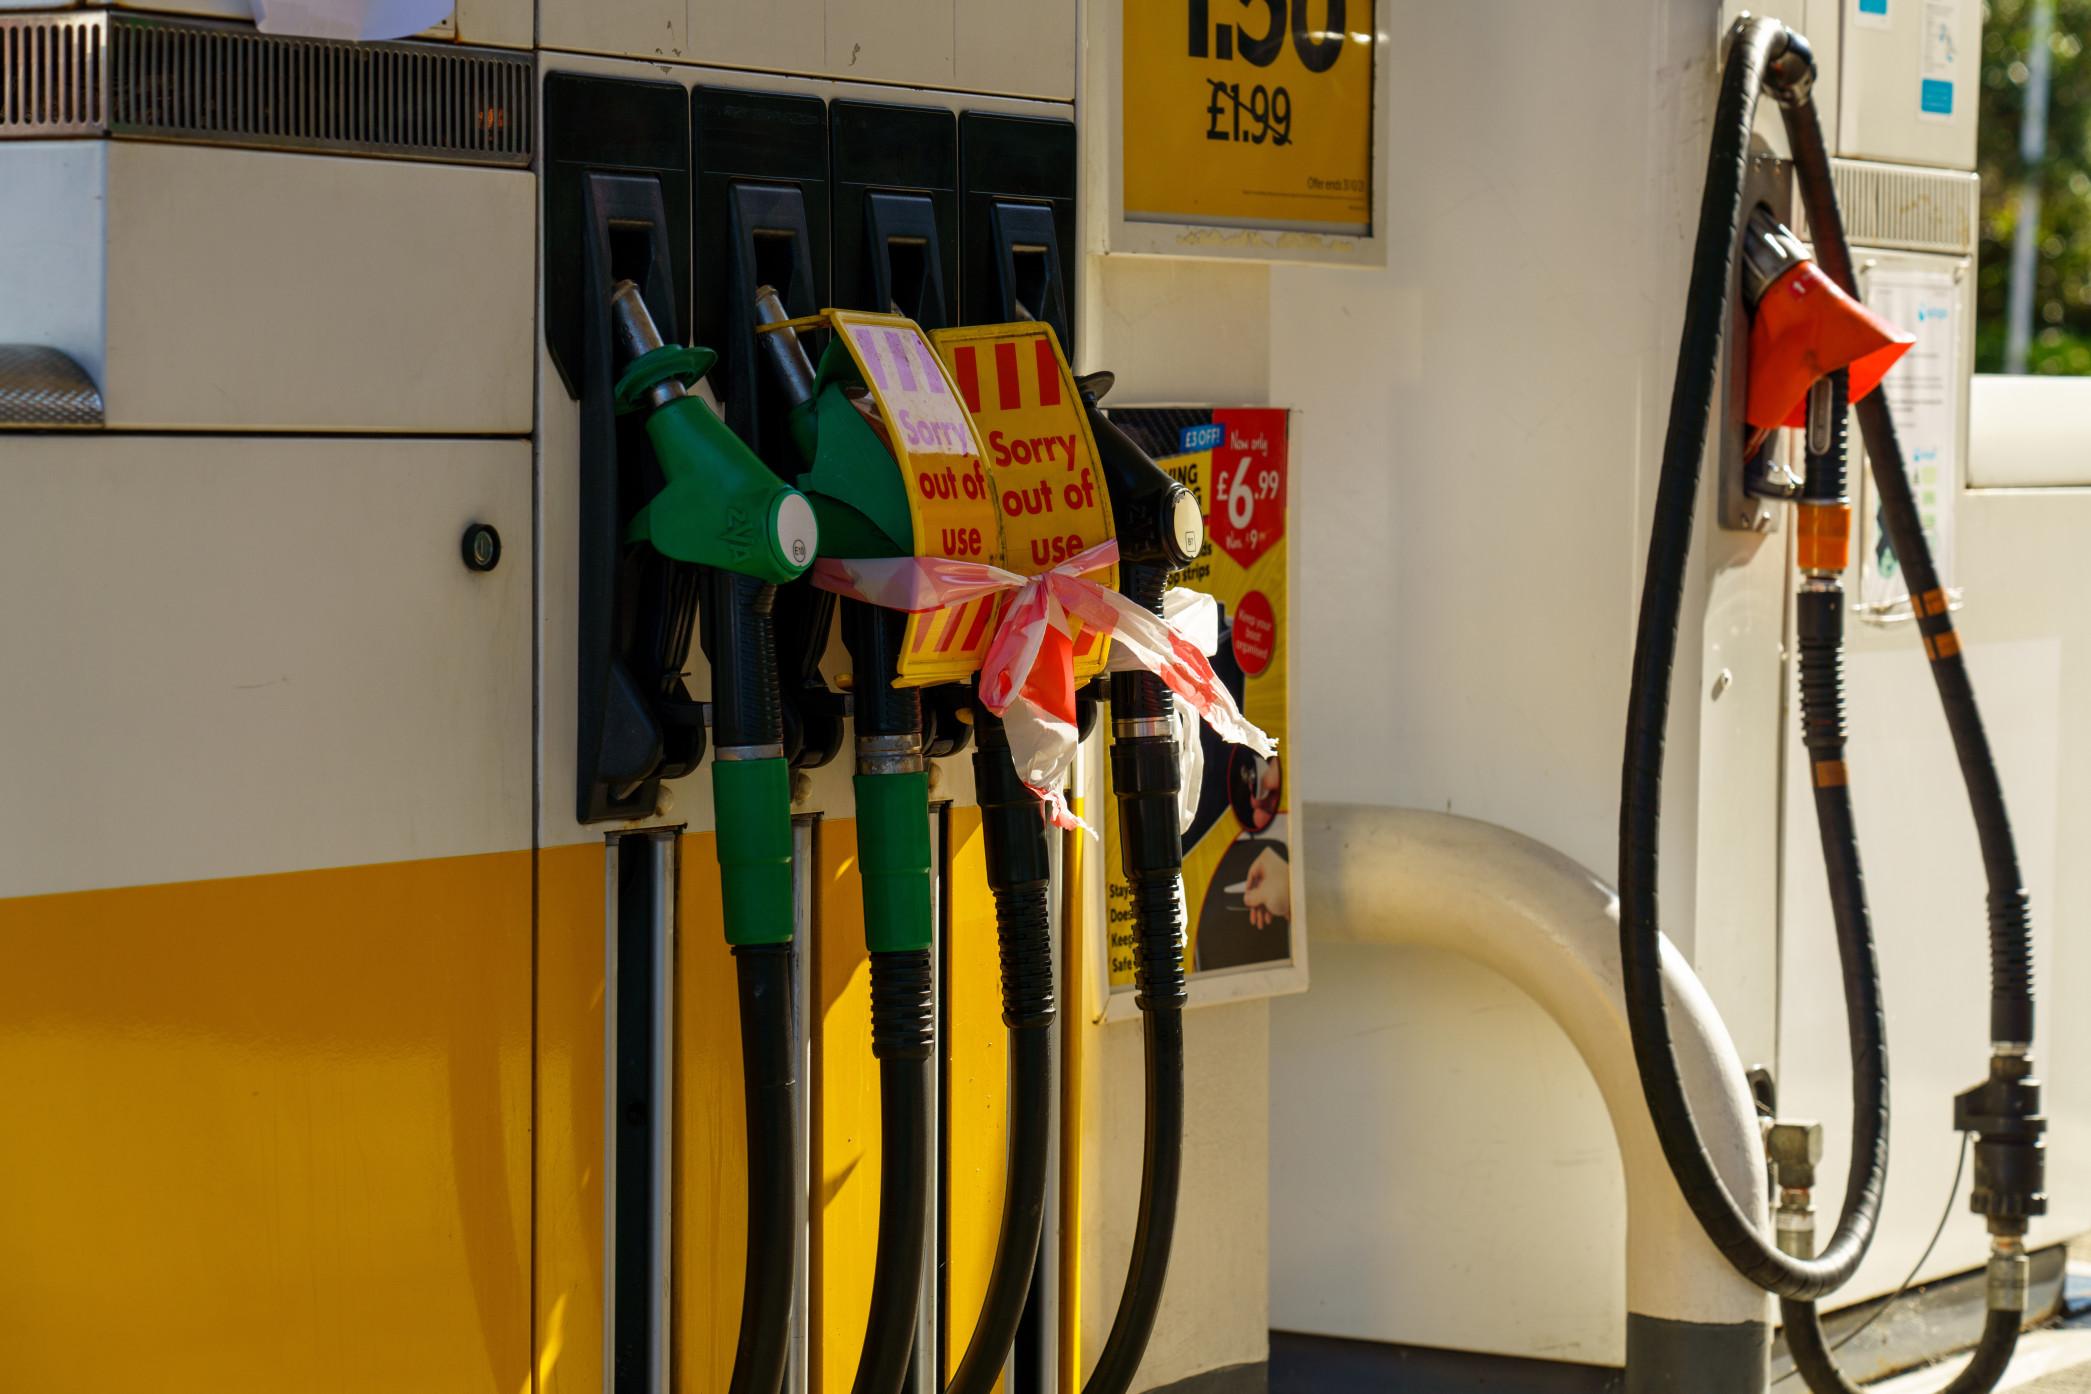 Britain is in the midst of a huge gas shortage.